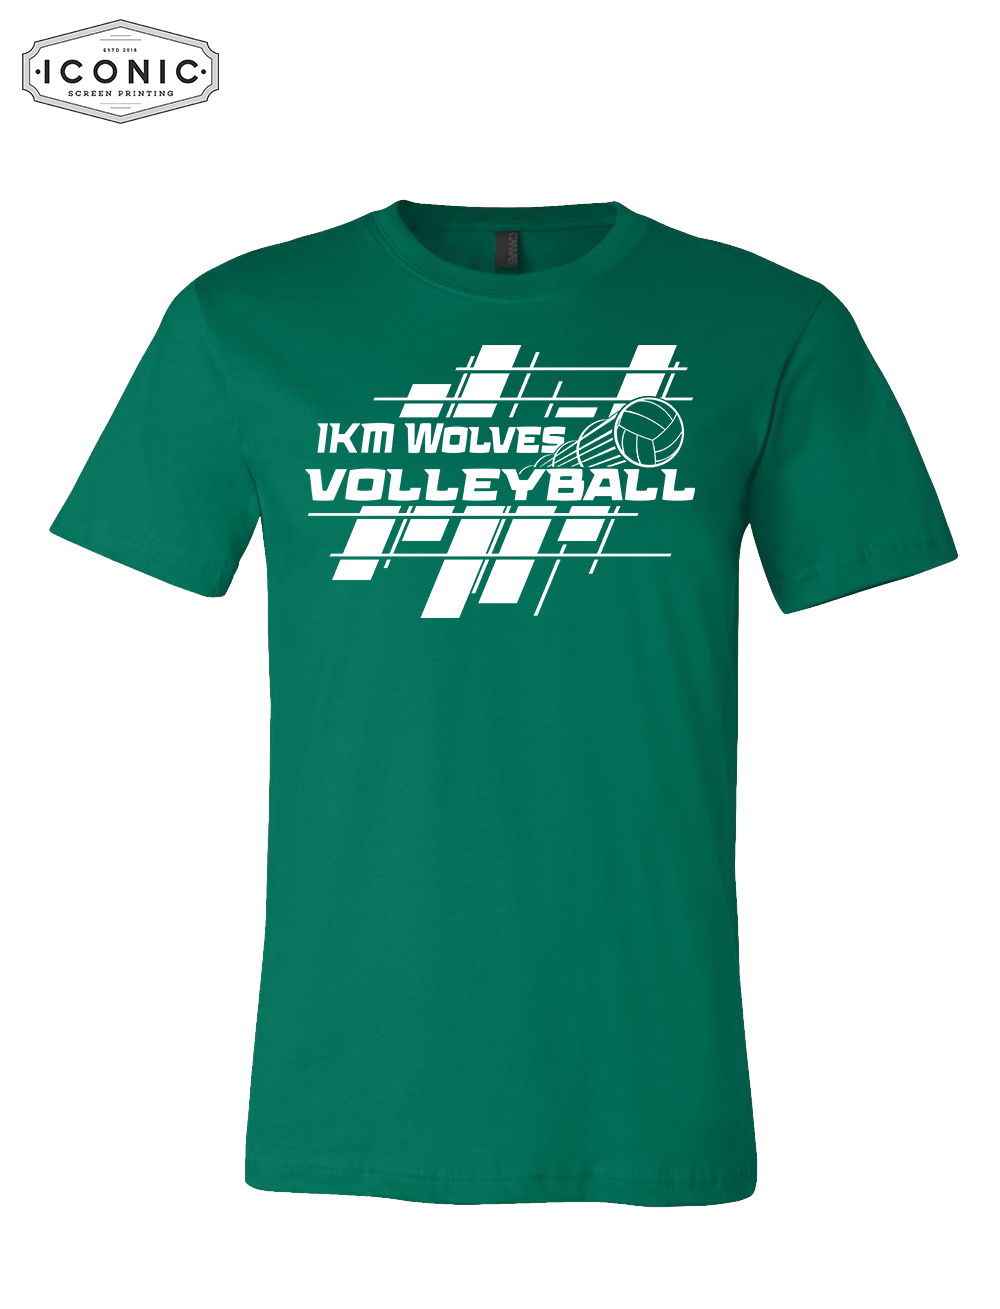 IKM Wolves Volleyball - Unisex Jersey Tee